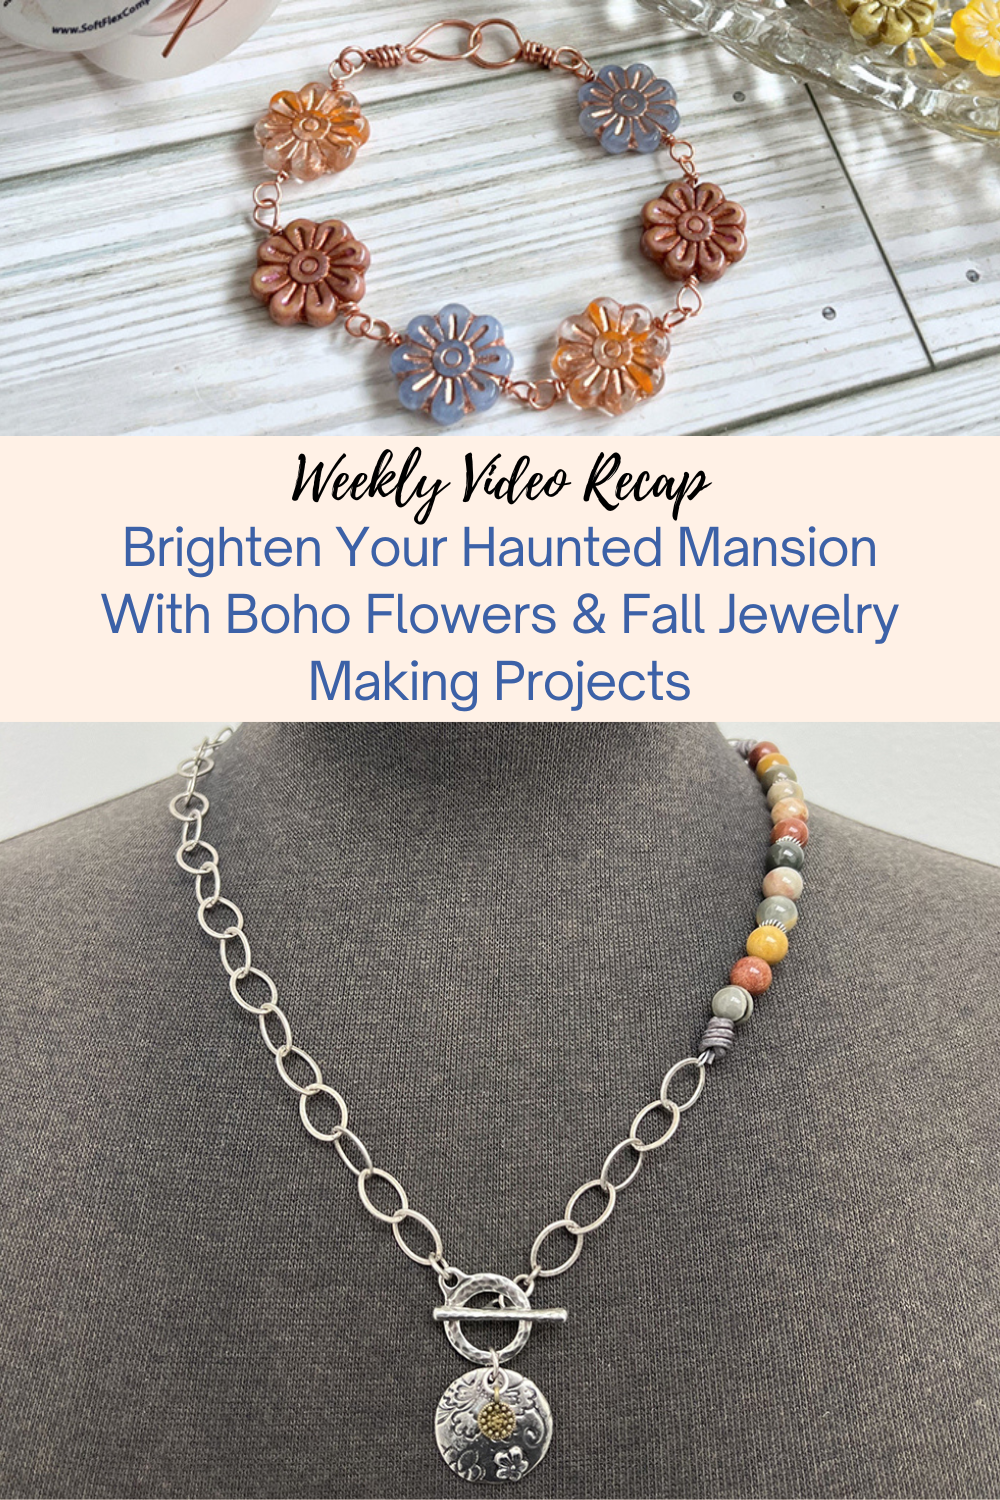 Brighten Your Haunted Mansion With Boho Flowers & Fall Jewelry Making Projects Collage